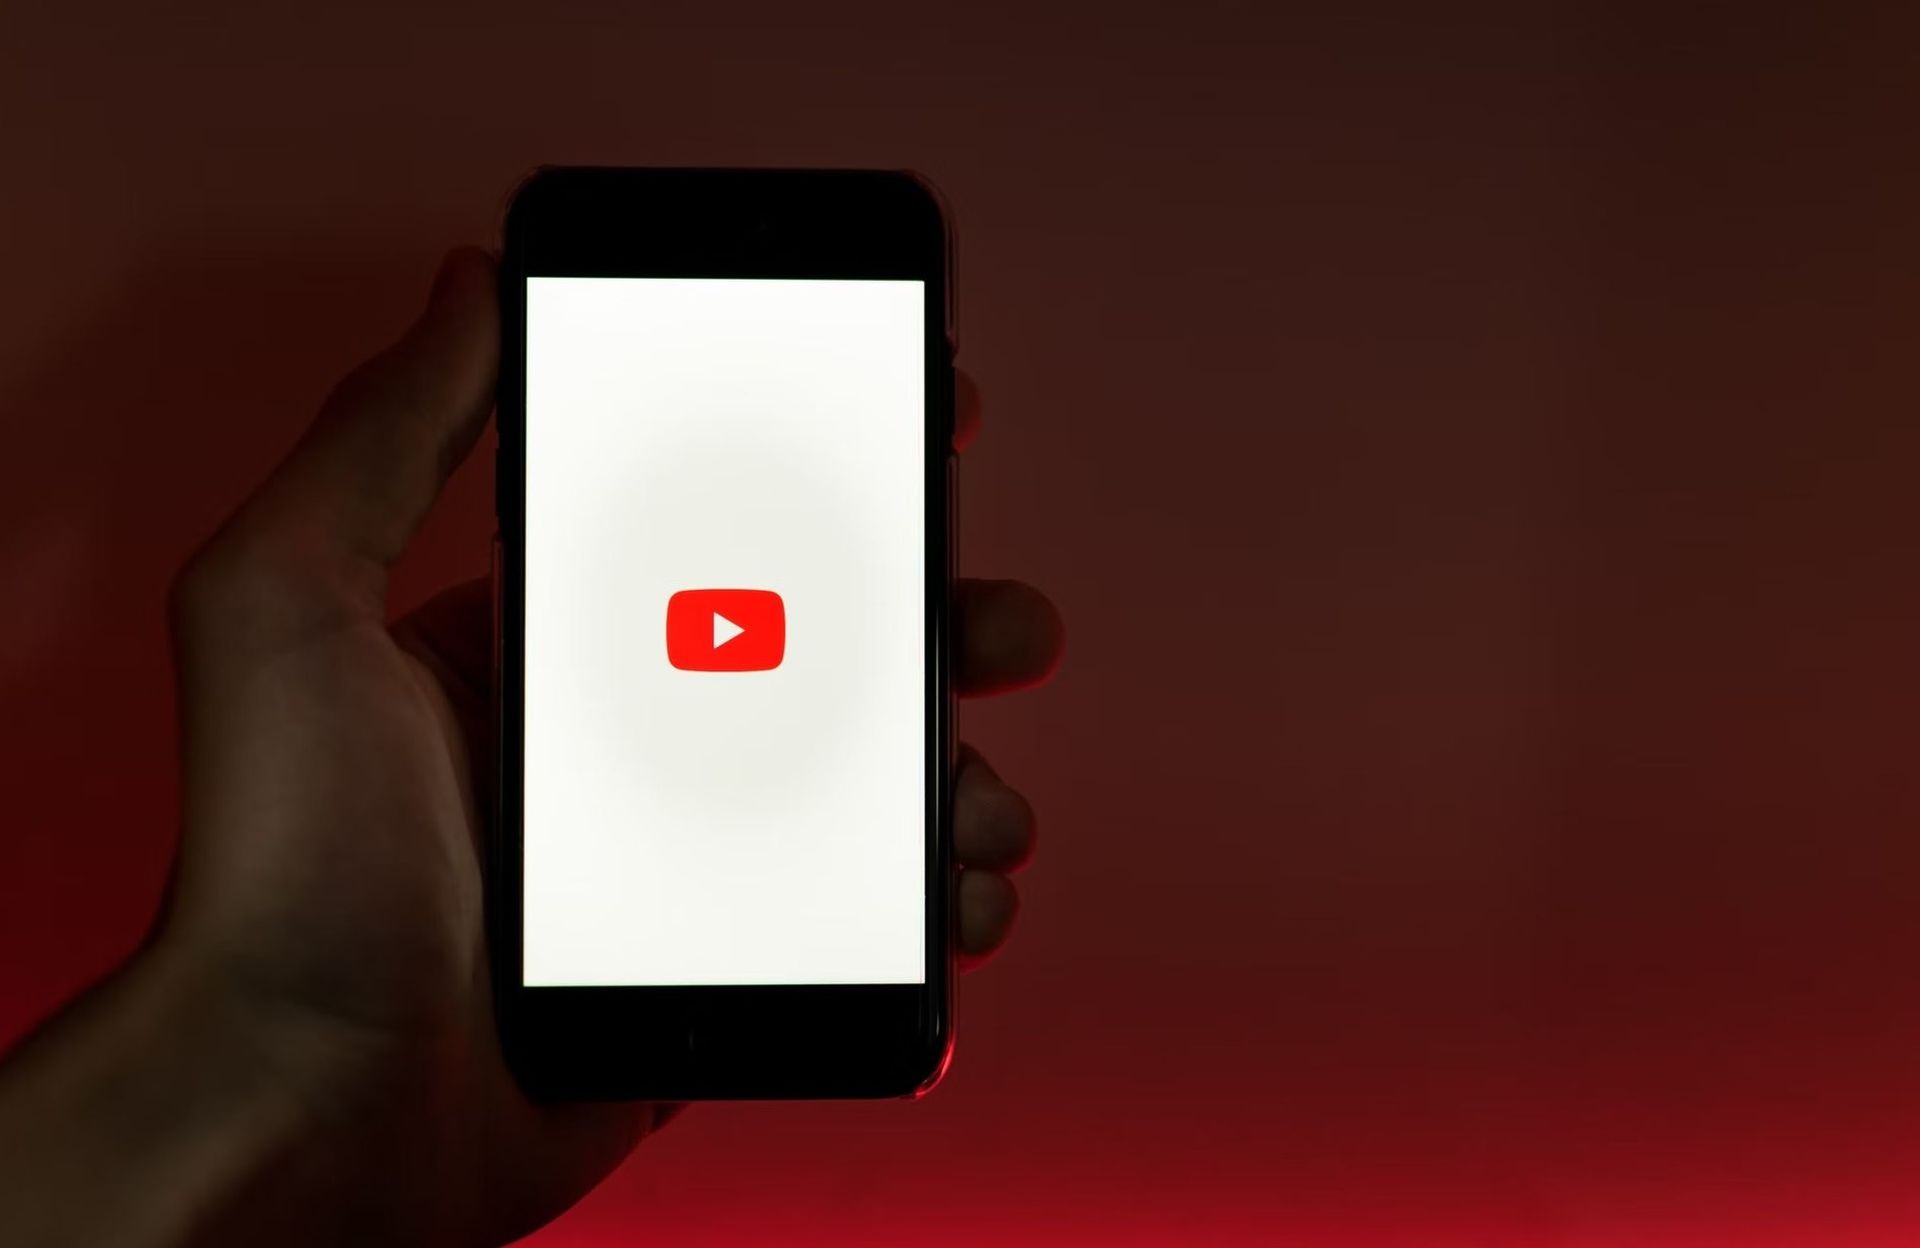 Since its debut, a lot of users have been asking the same question: Is YouTube Premium worth it? Well below, we are going to explain what is YouTube Premium, how much does it cost and dig into more details so you can make an informed decision.